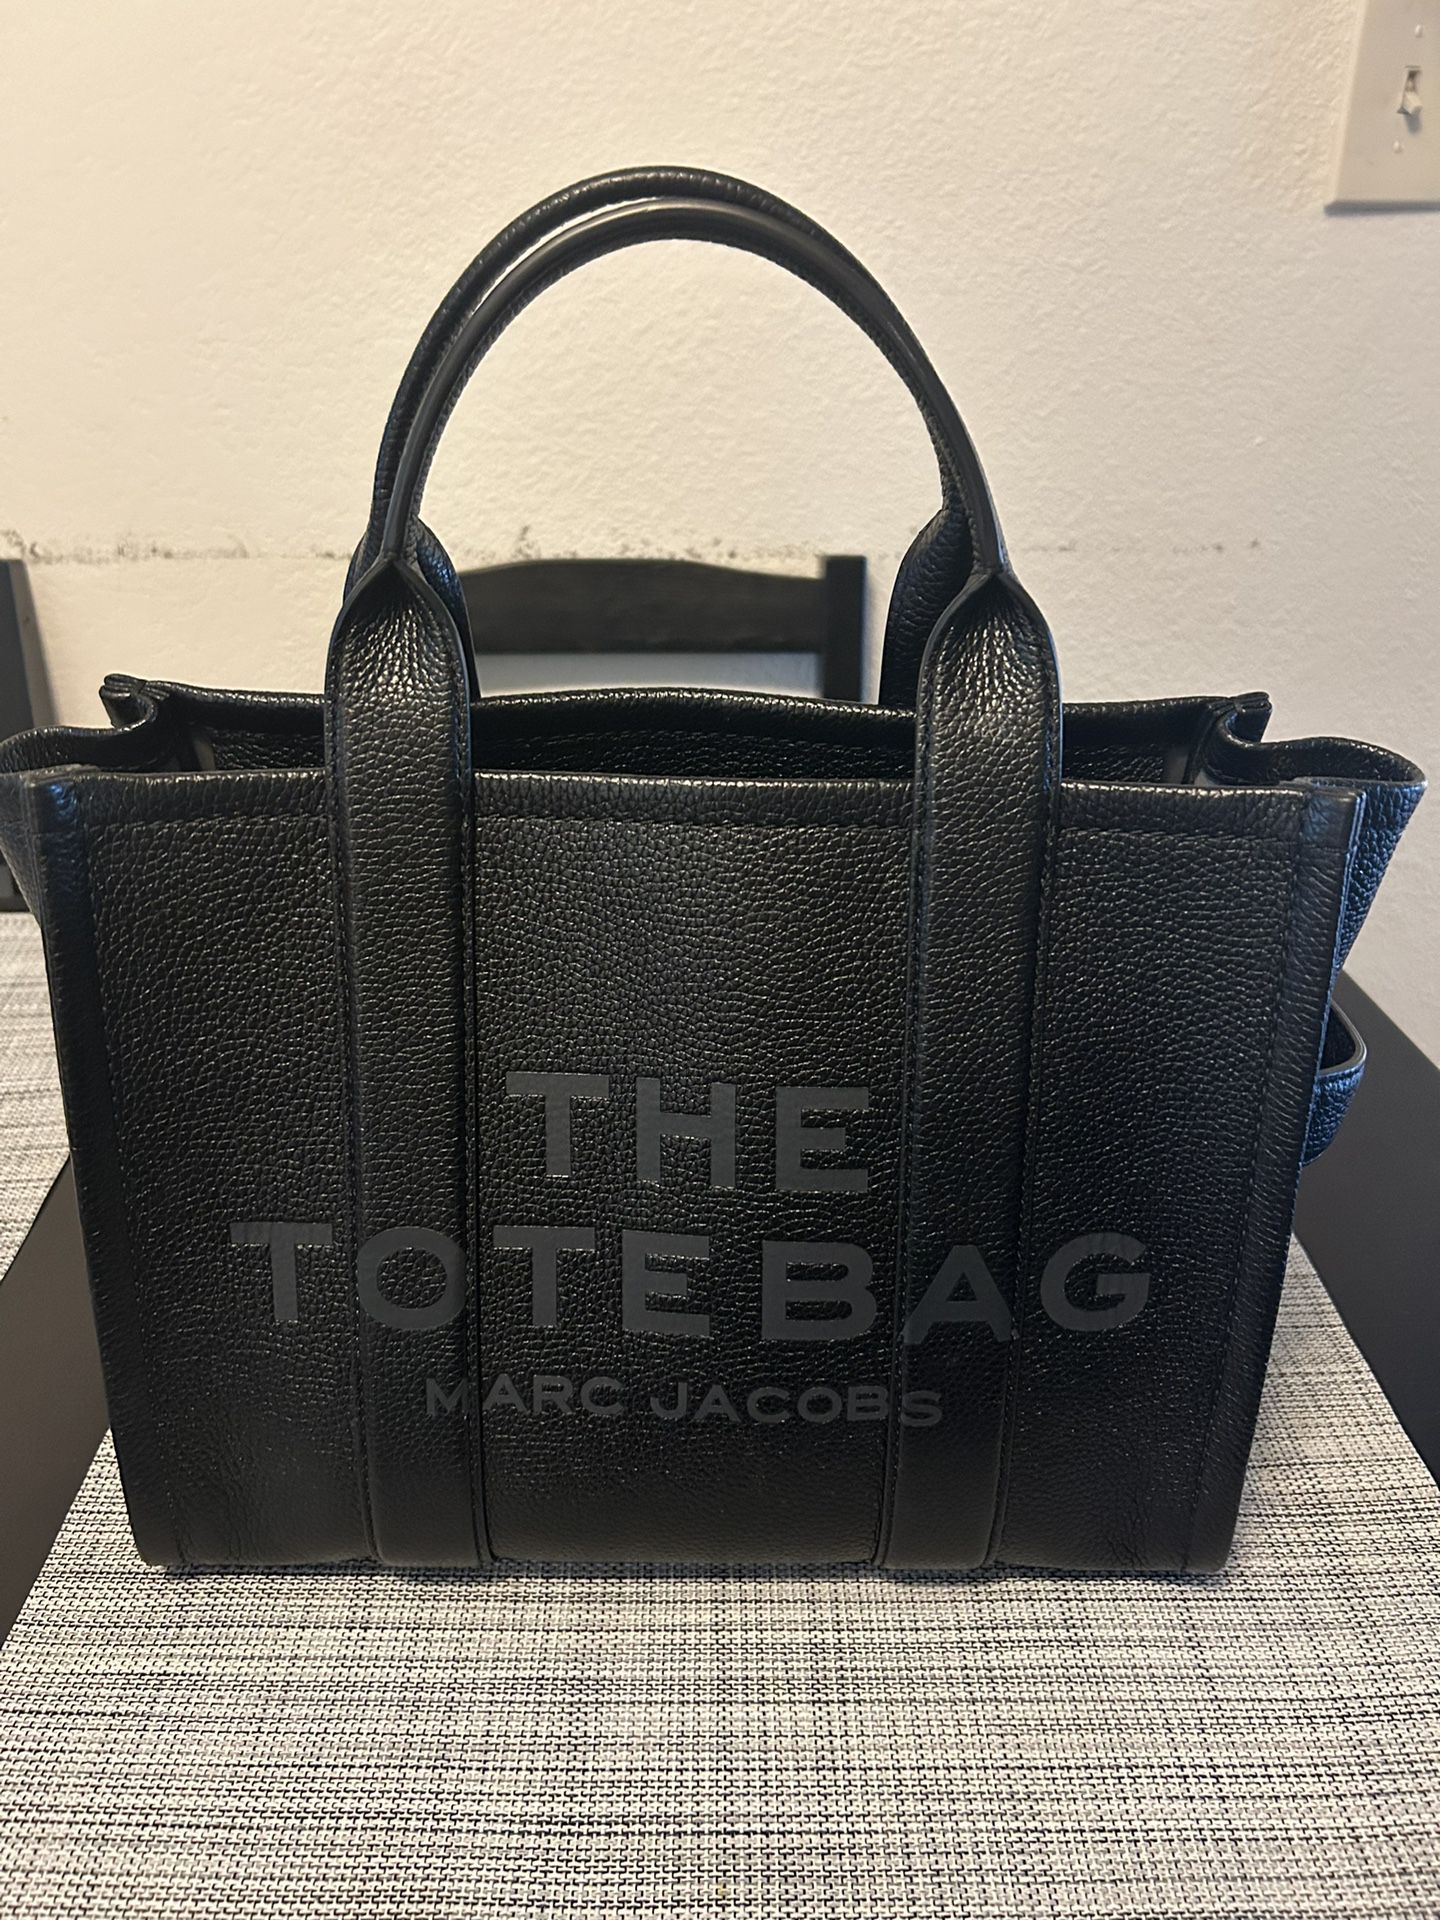 marc jacob’s leather large tote